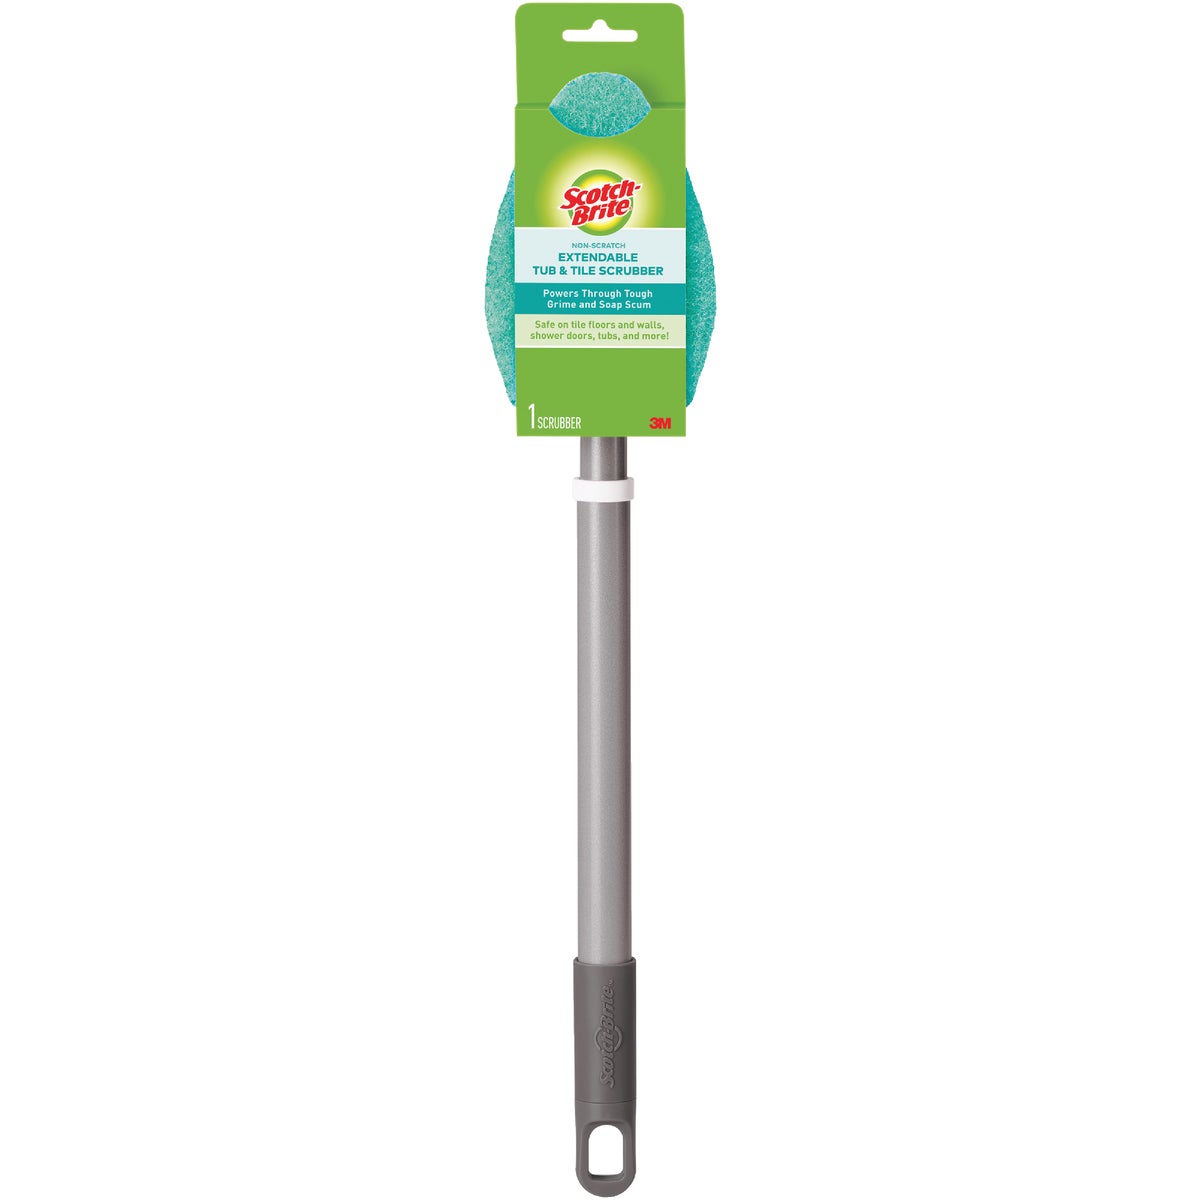 Item 600925, Power easily through tough shower and tub grime in hard-to-reach places 